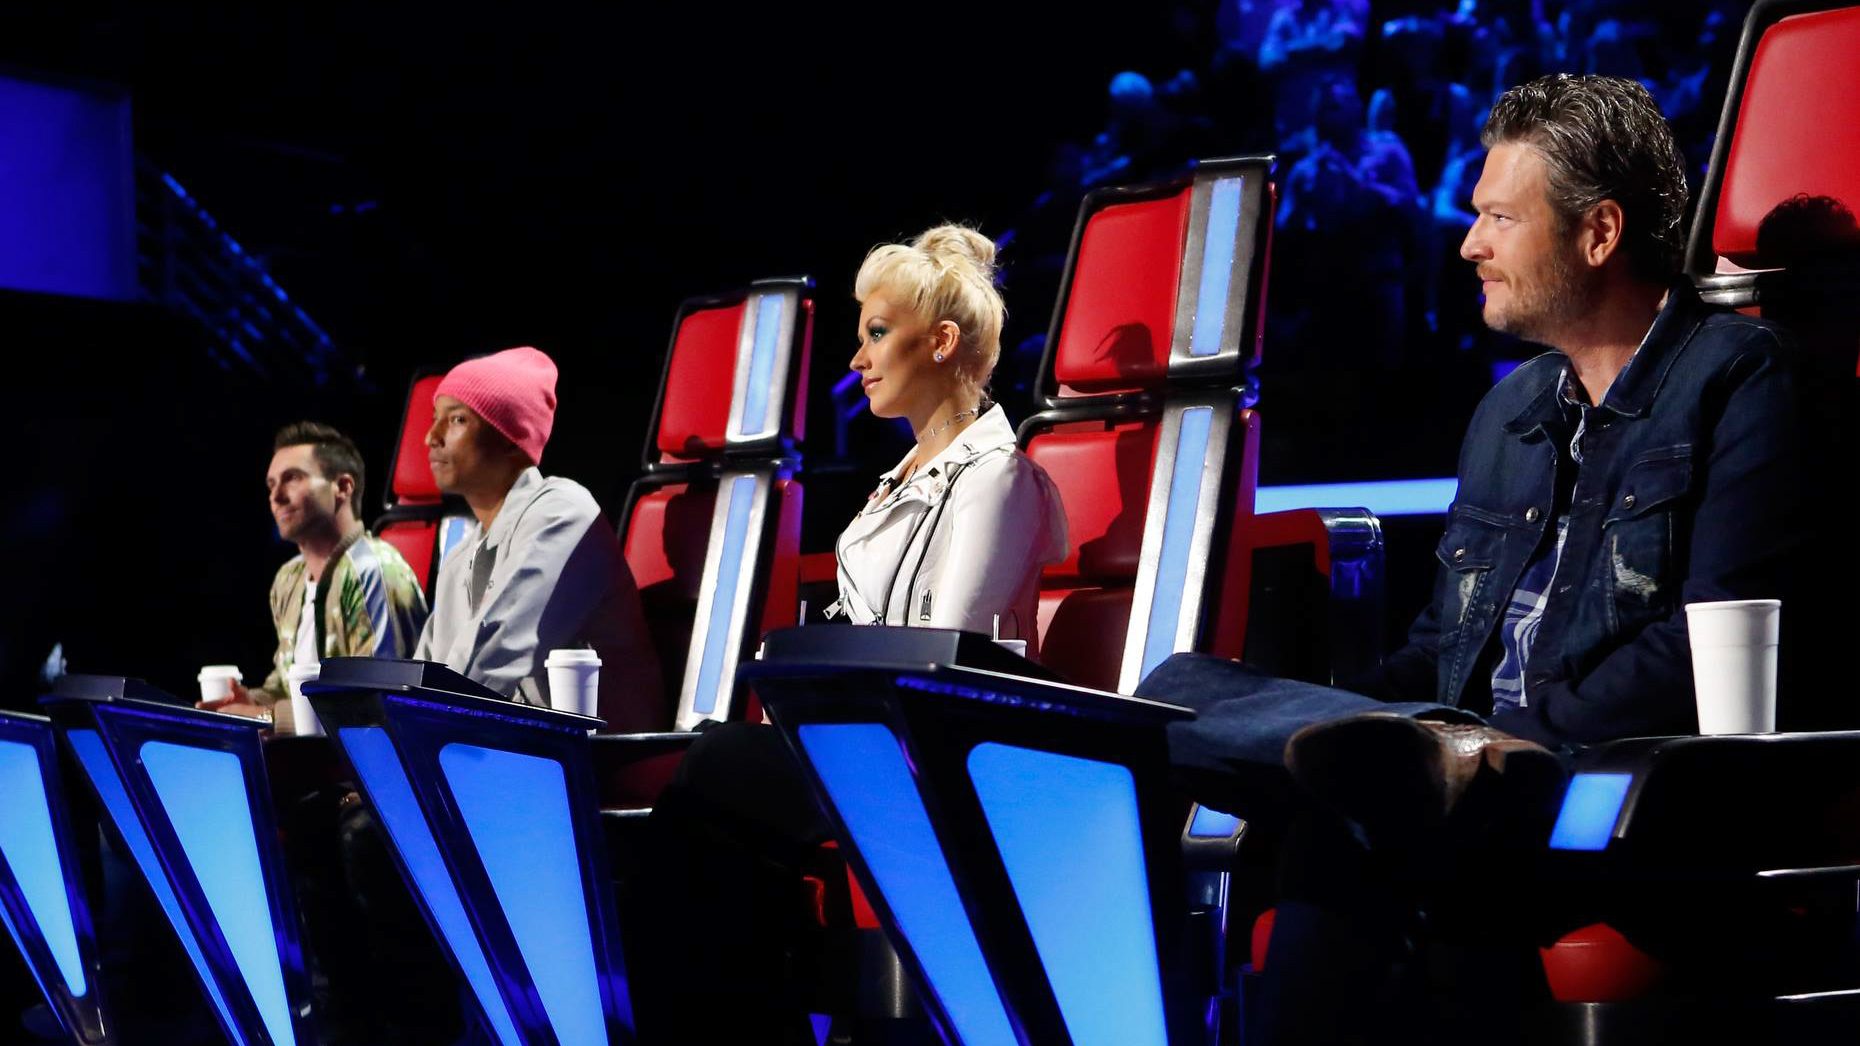 ‘The Voice’ episodes to be made just for Snapchat